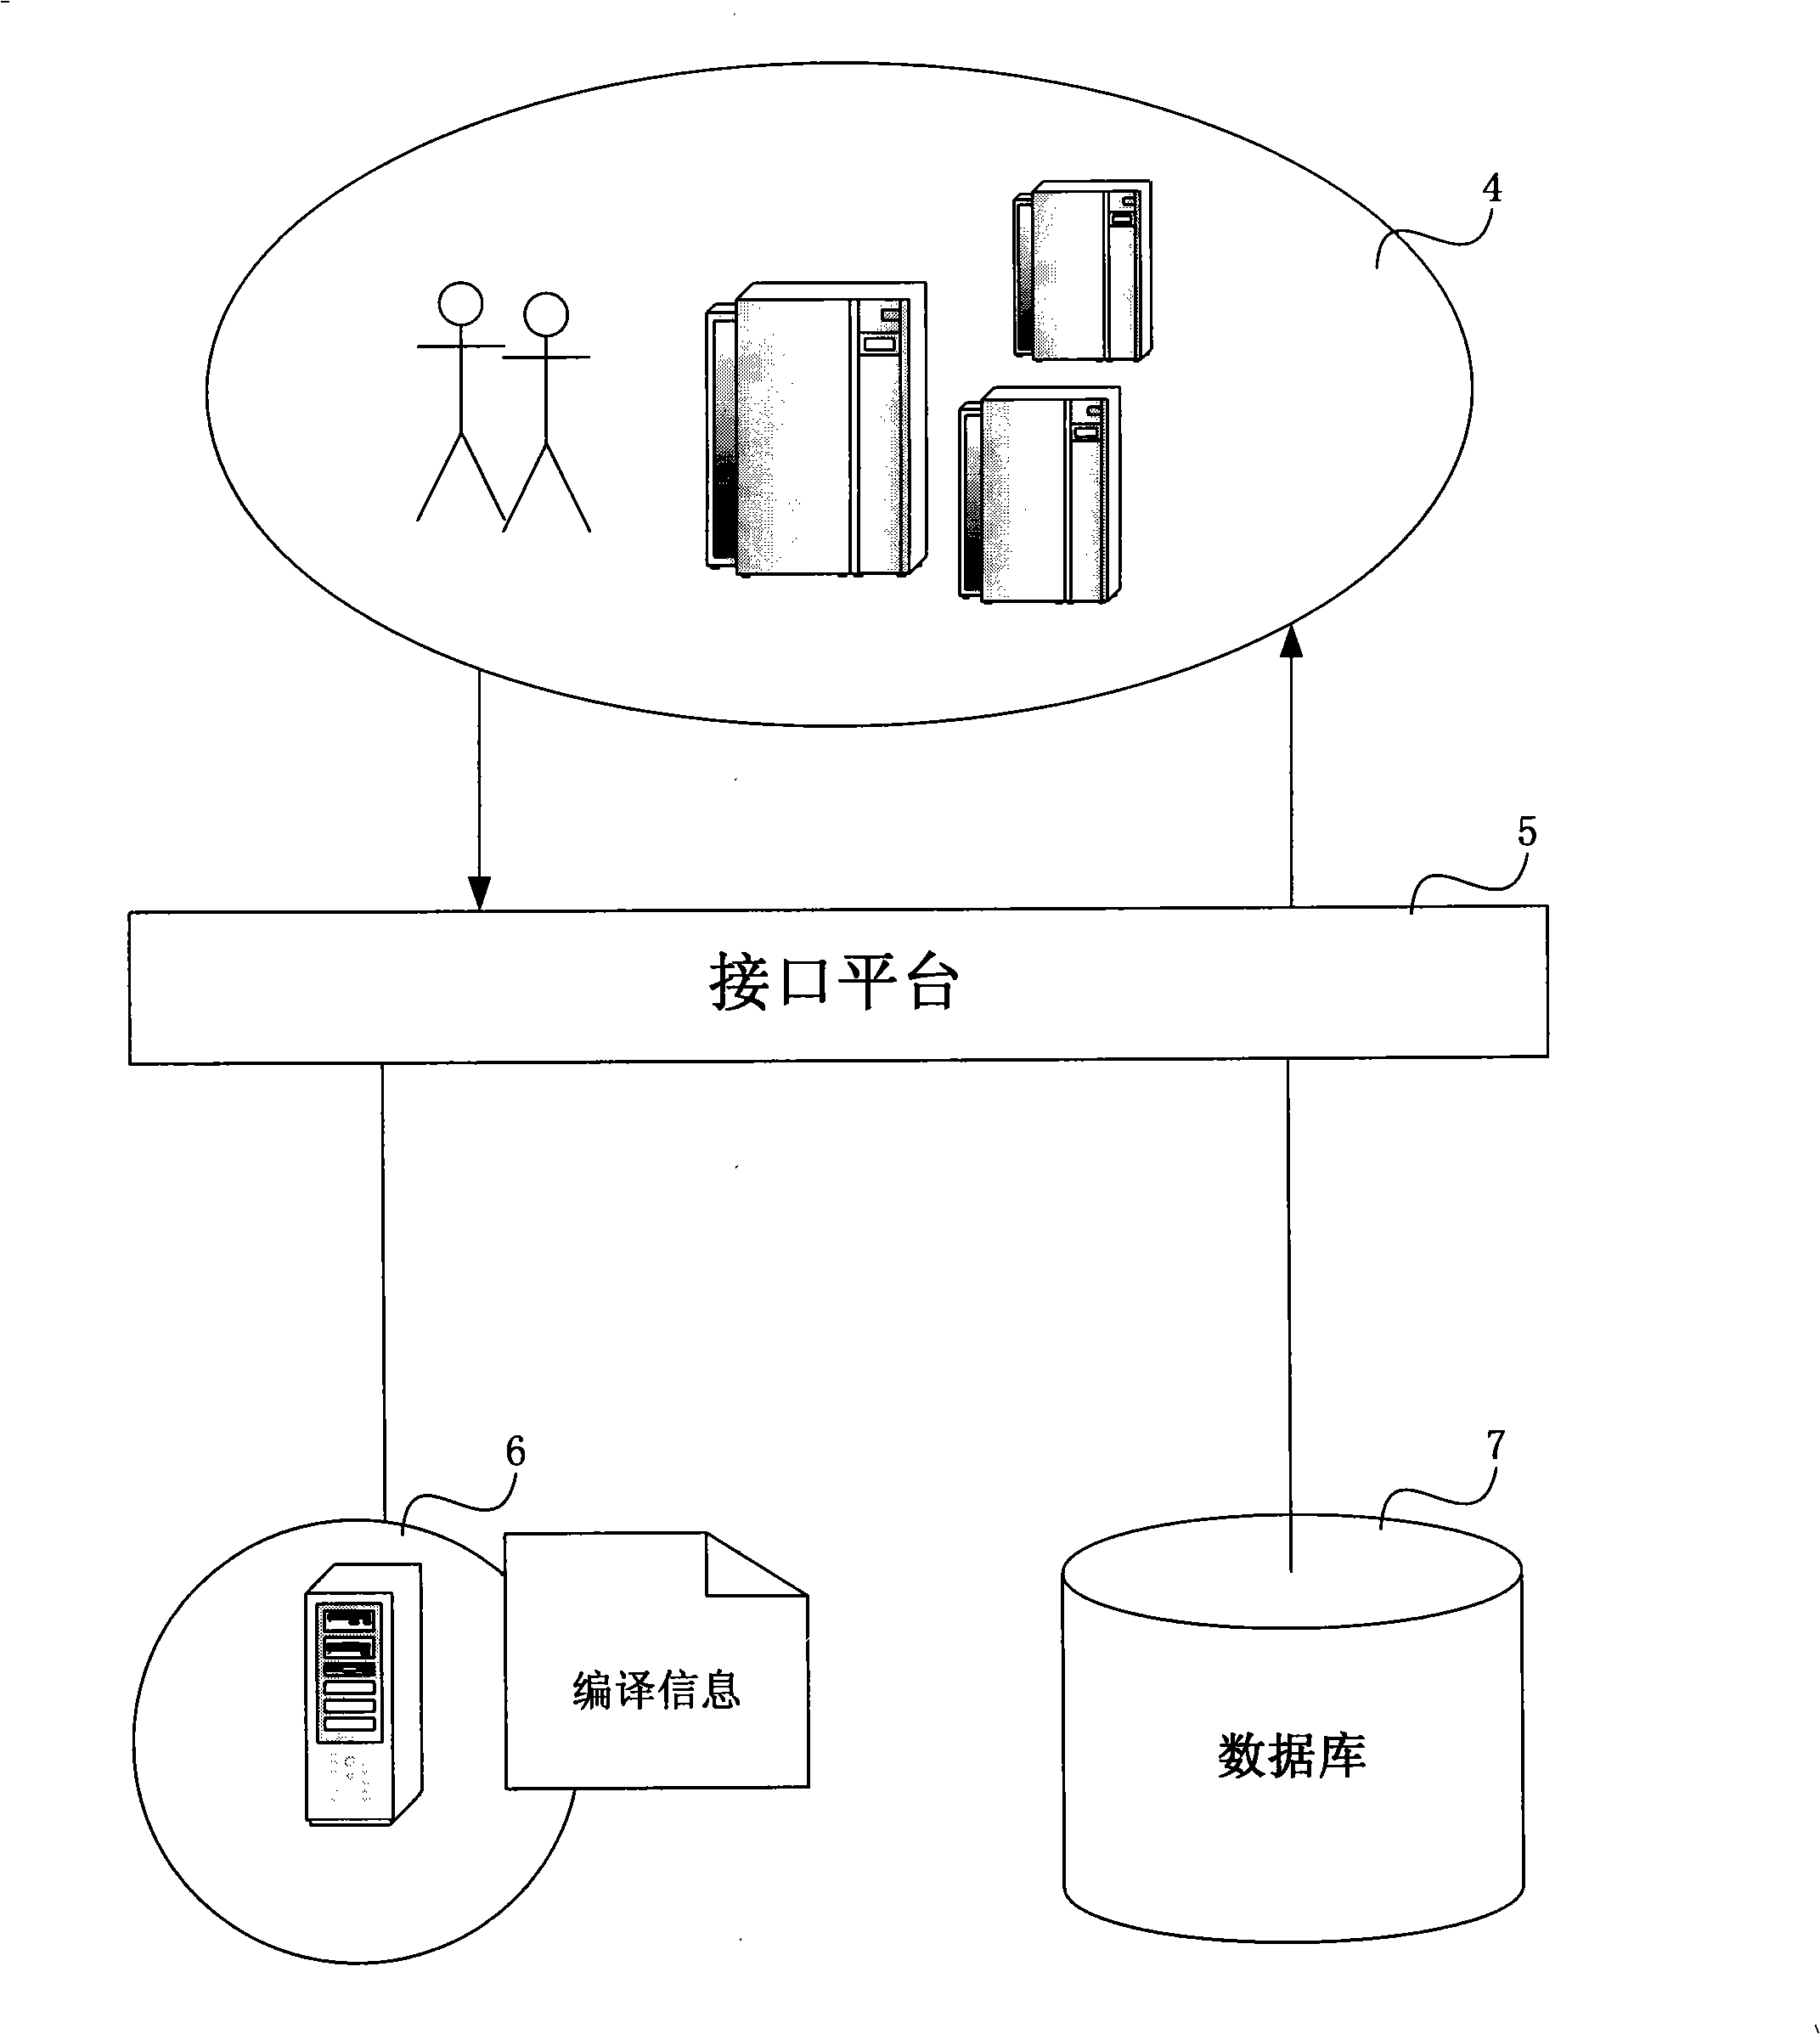 Compiling system and method